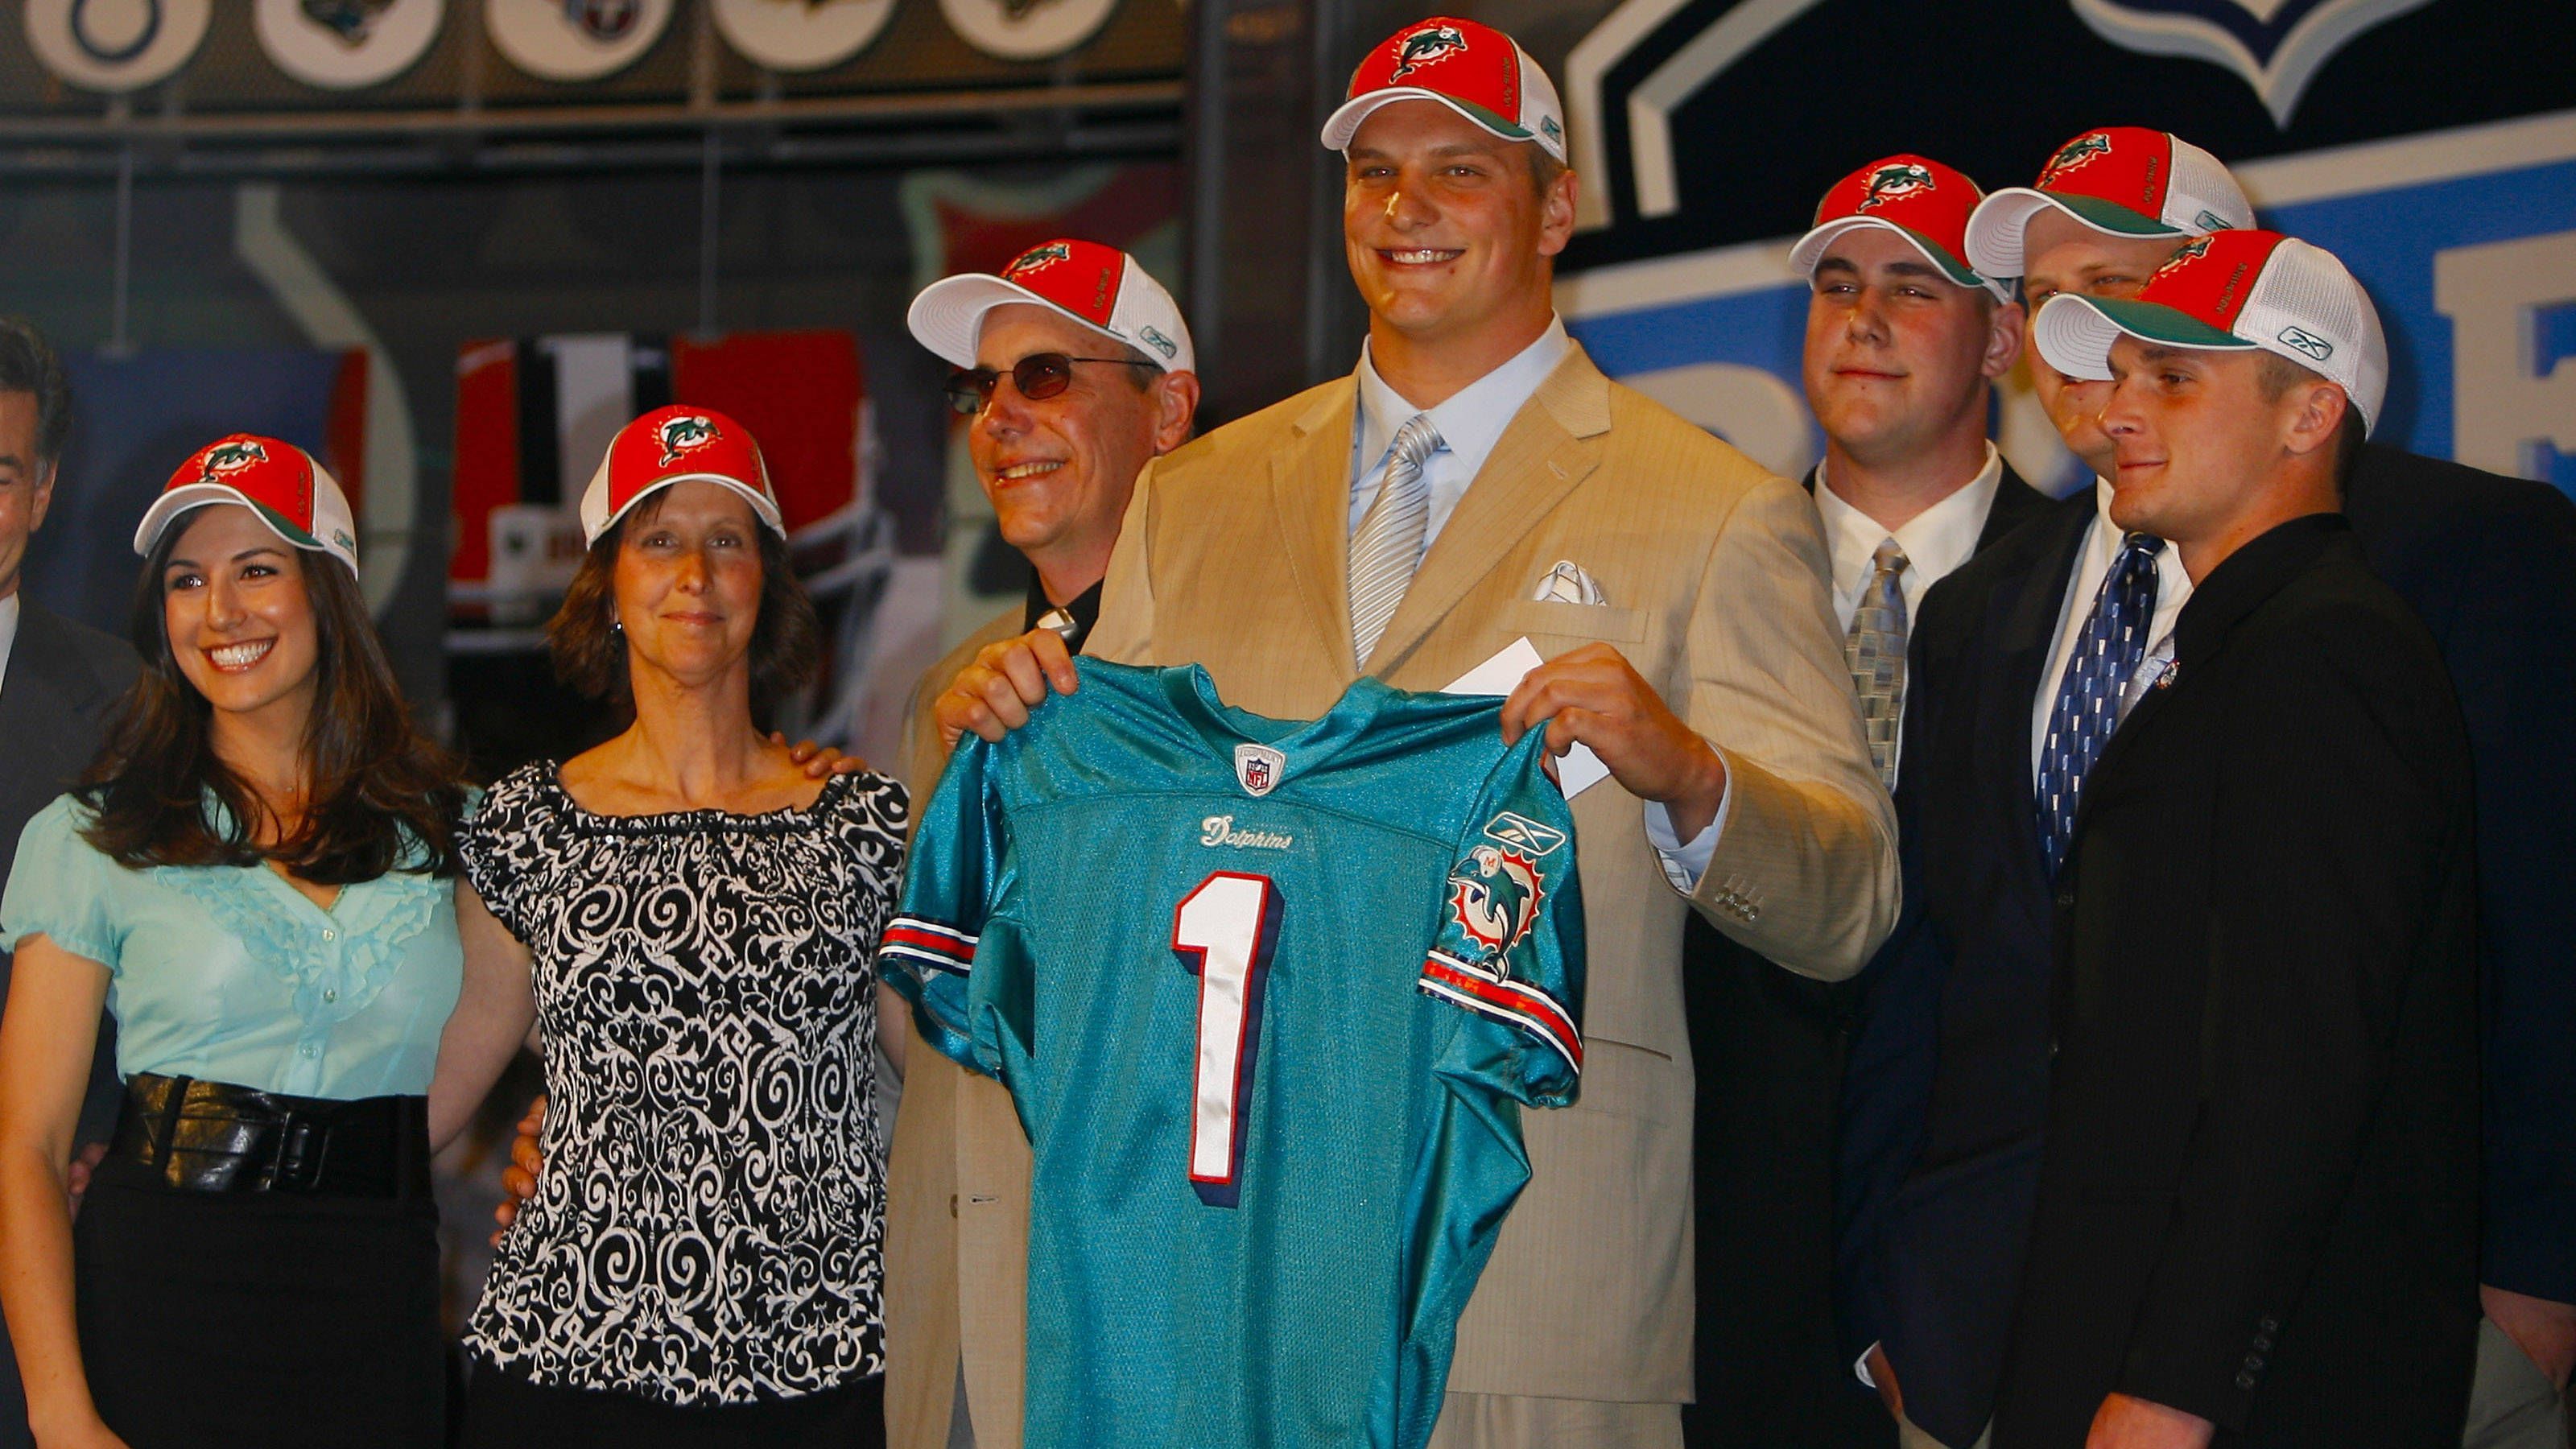 <strong>Jake Long - 2008</strong><br>Position: Offensive Tackle<br>Draft-Team: Miami Dolphins <br>Erfolge: 4x Pro Bowl<br>Karriereende: 2016